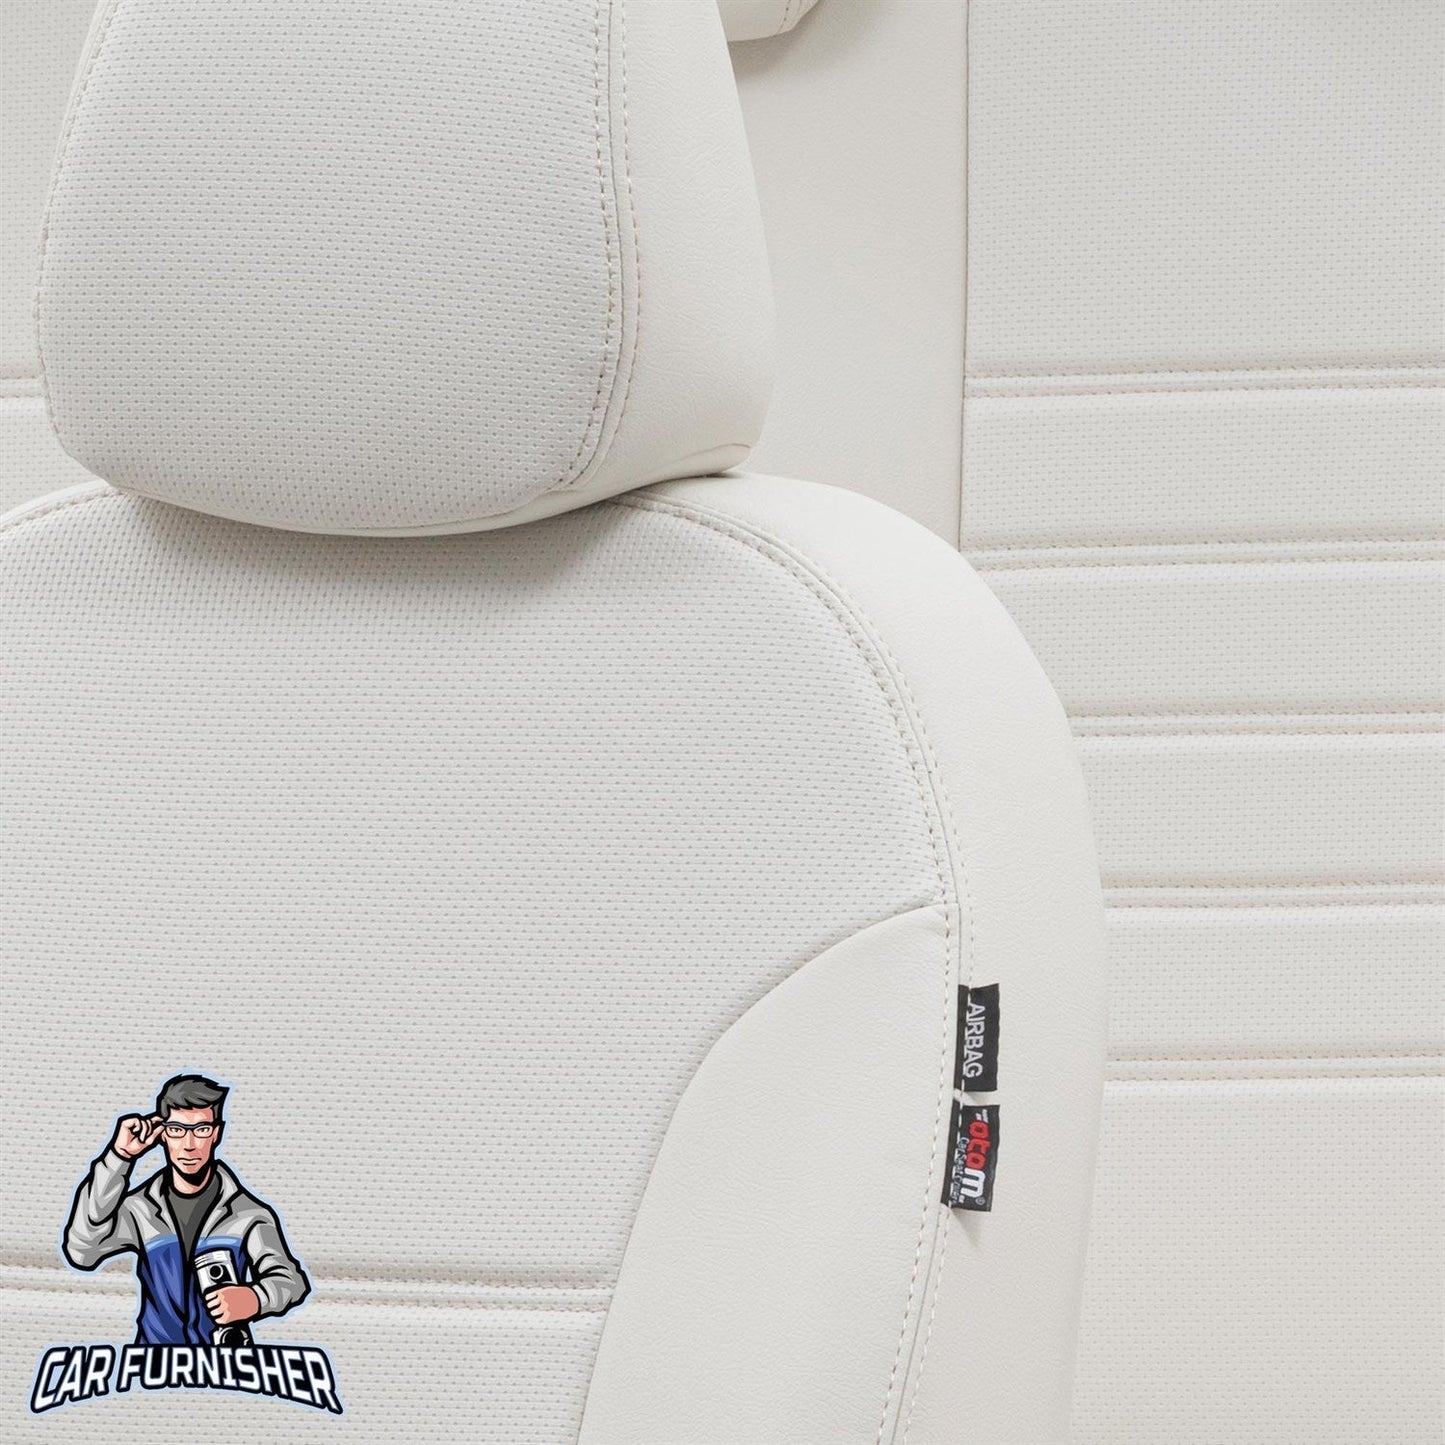 Skoda Kamiq Seat Covers New York Leather Design Ivory Leather